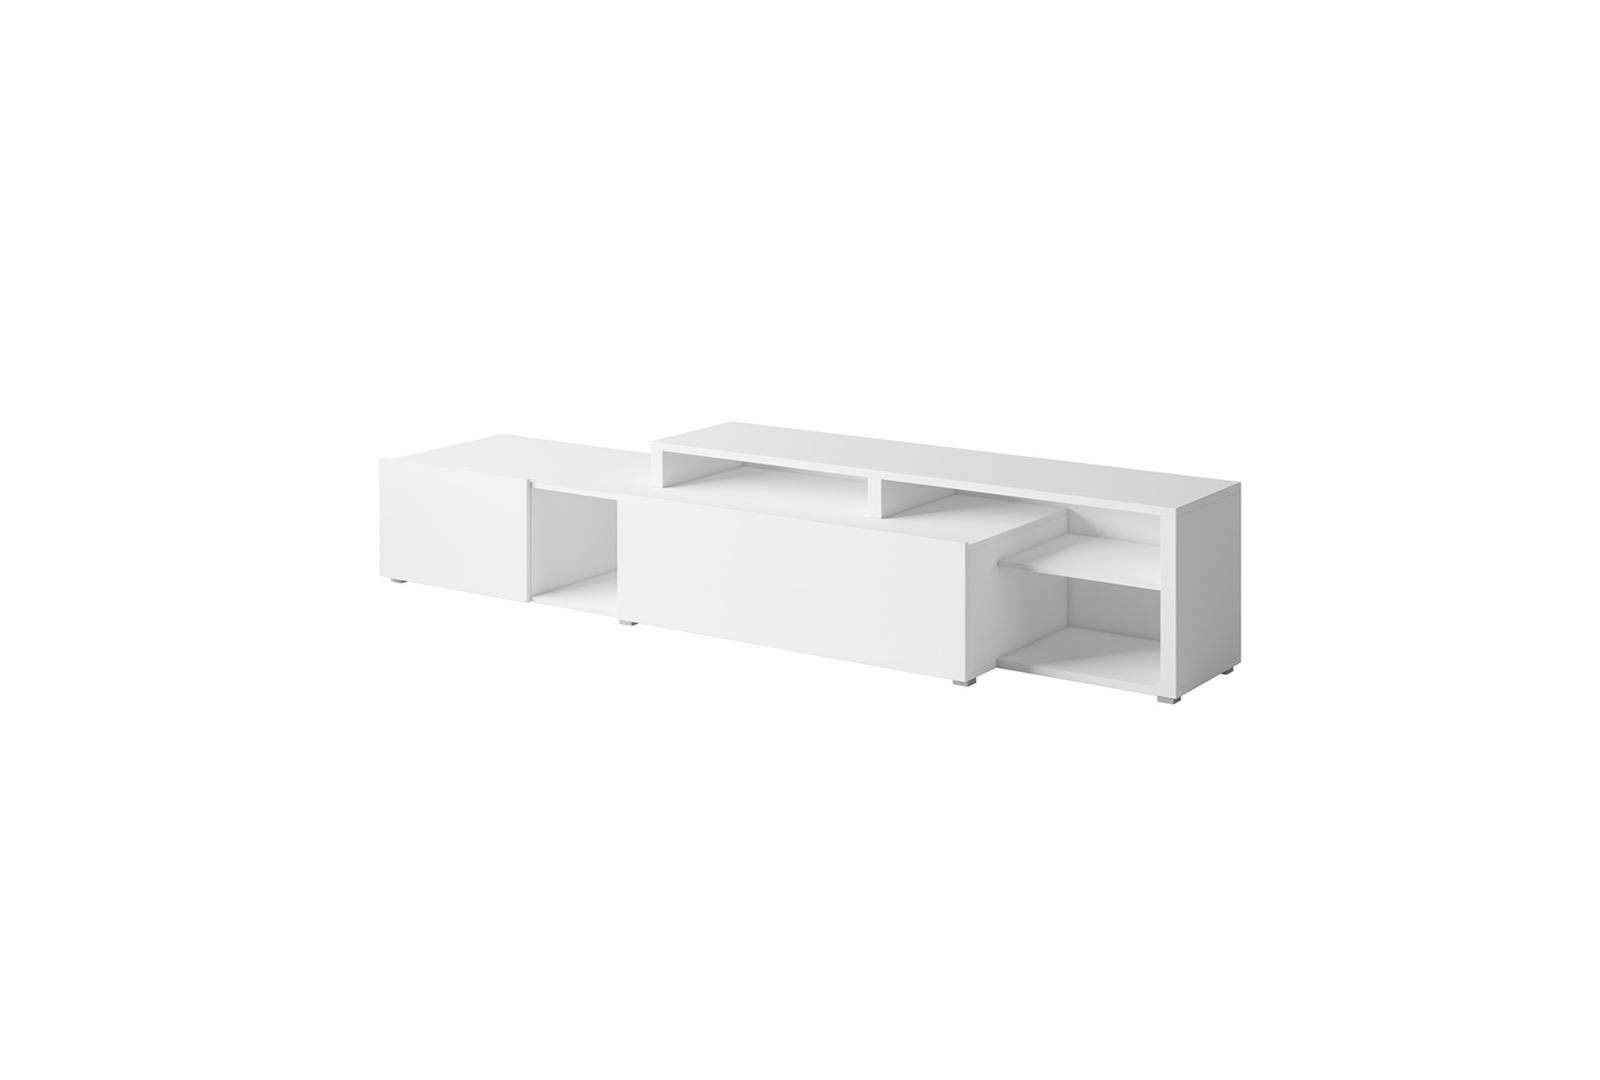 VENTO TV CHEST OF DRAWERS TYPE 40